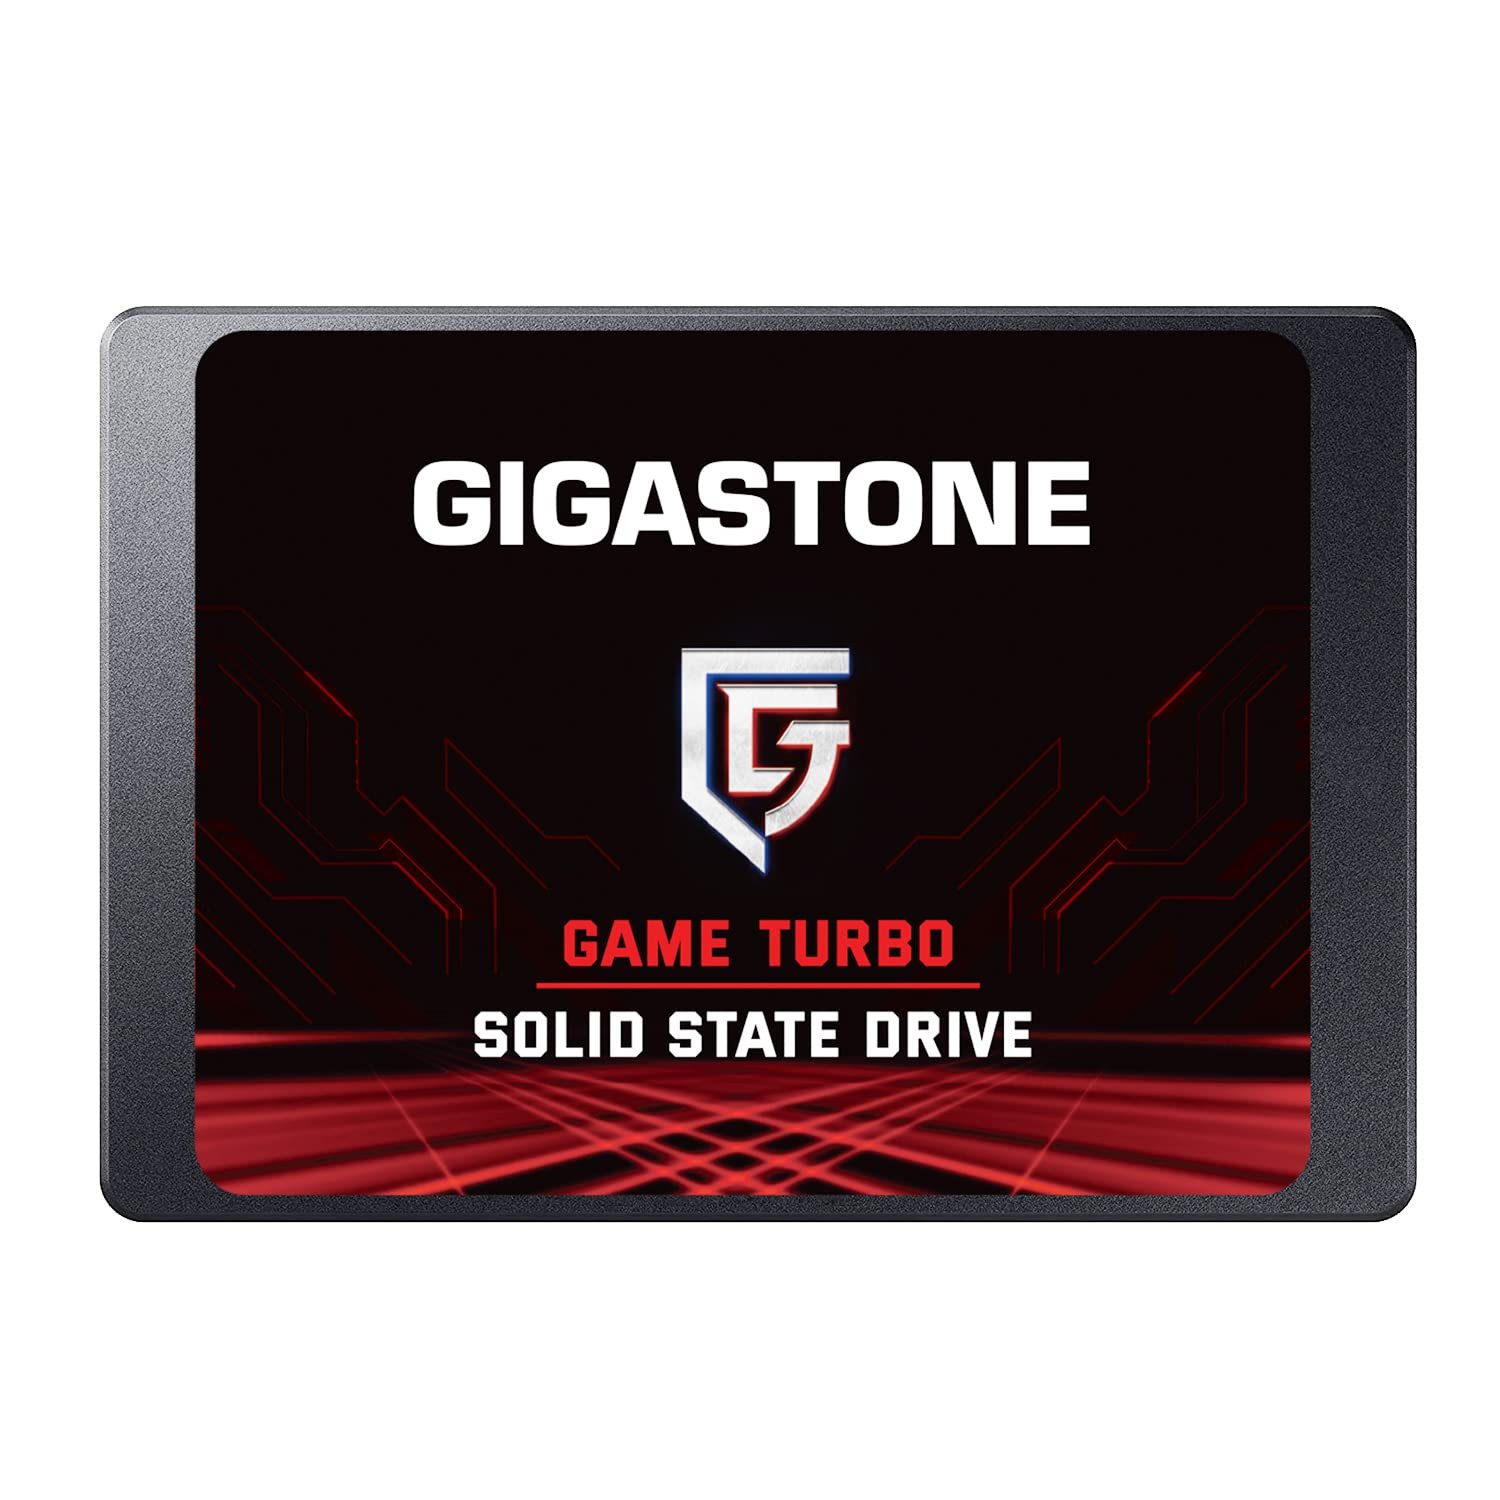 Game Turbo 1Tb Ssd Sata Iii 6Gb/S. 3D Nand 2.5"" Internal Solid State Drive, Read Up To 550Mb/S. Co